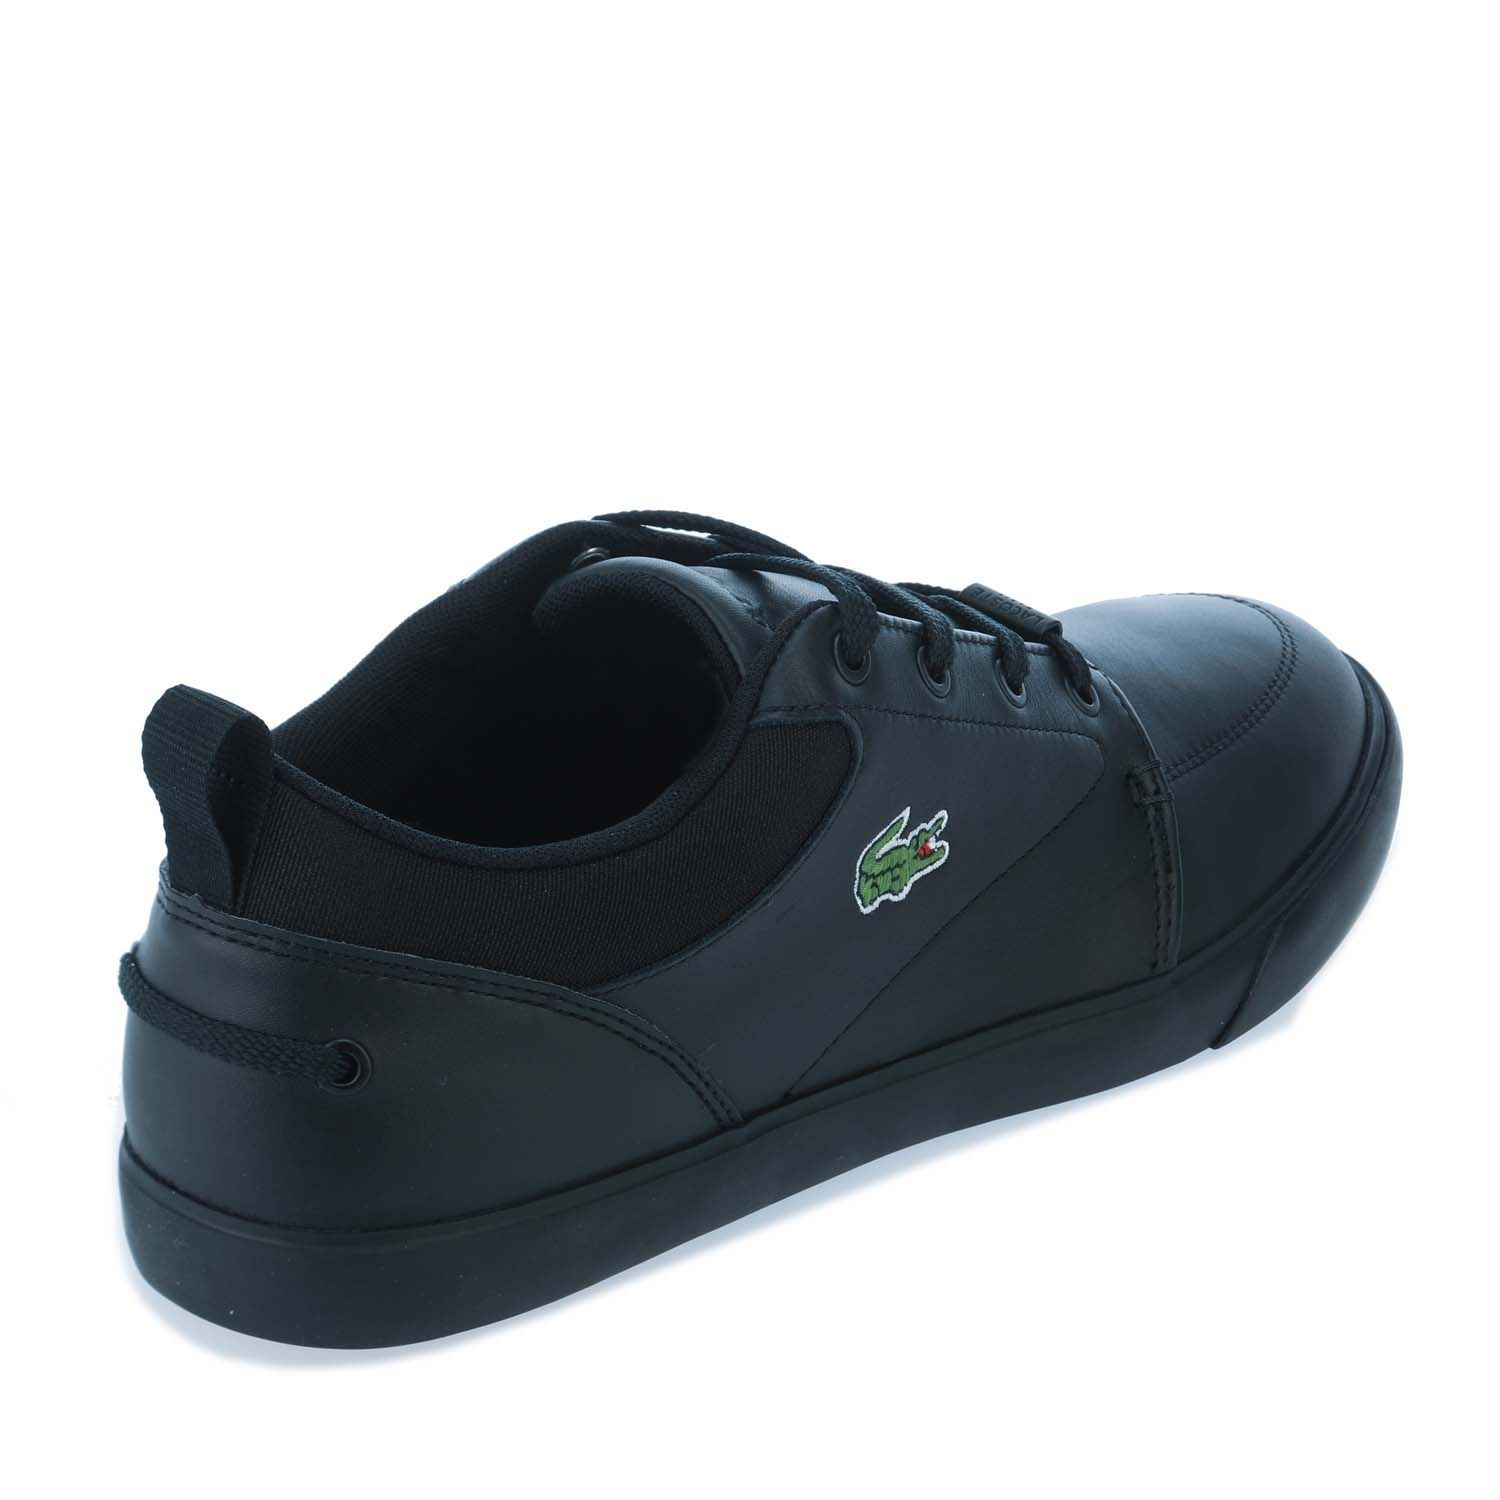 Mens Lacoste Bayliss Trainers in black.- Synthetic leather upper.- Lace up fastening.- Lace detail to the heel.- Ortholite® insole.- Tonal embroidered tongue branding.- Embroidered branding. - Rubber sole.- Leather upper  Textile lining  Synthetic sole.- Ref: 743CMA004802H